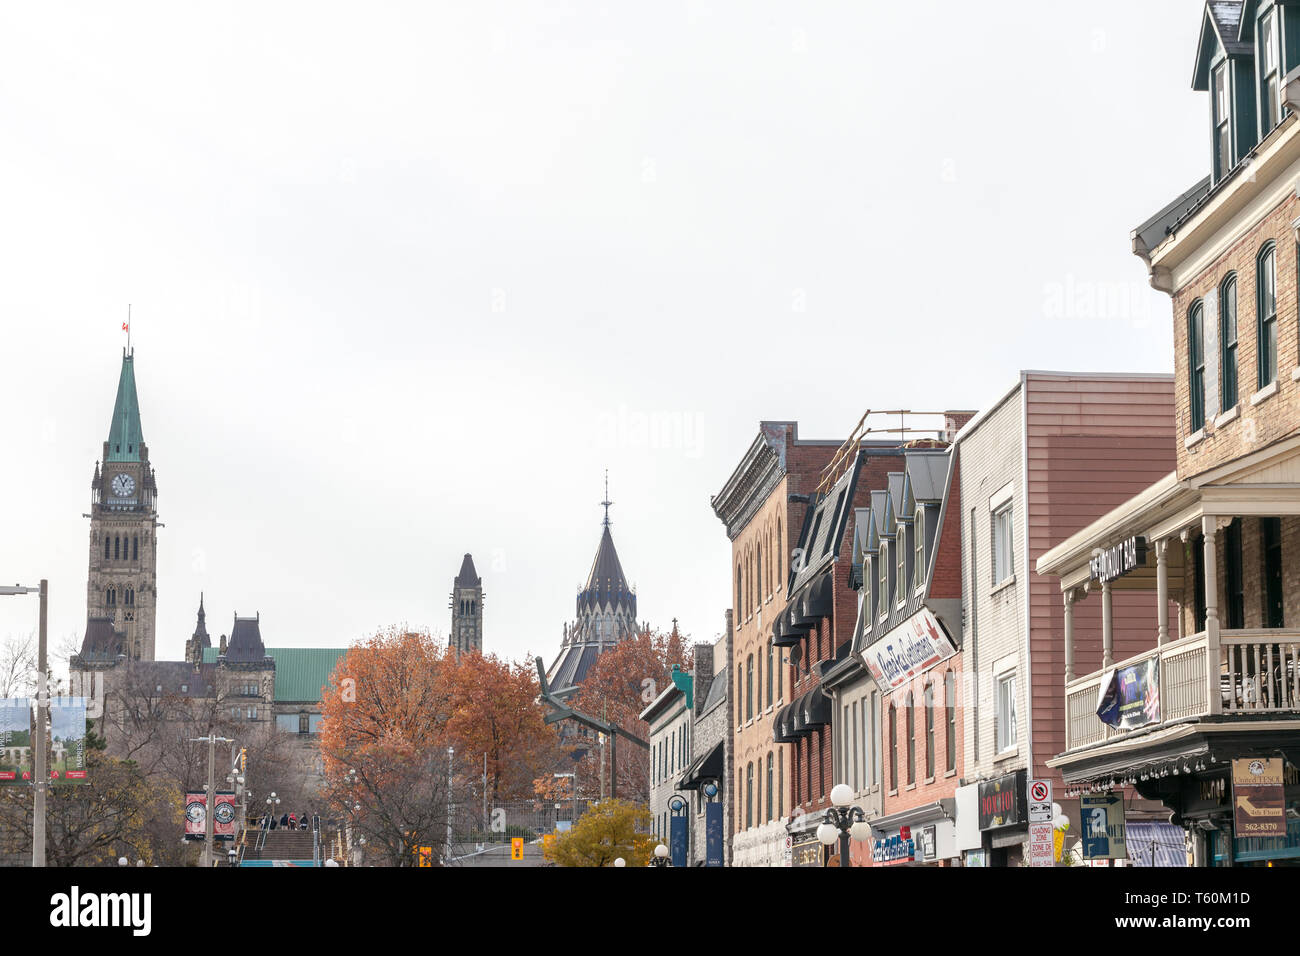 OTTAWA, CANADA - NOVEMBER 11, 2018: Canadian Parliamentary complex on Parliament Hill seen from the lower town of Ottawa also called ByWard market. Th Stock Photo